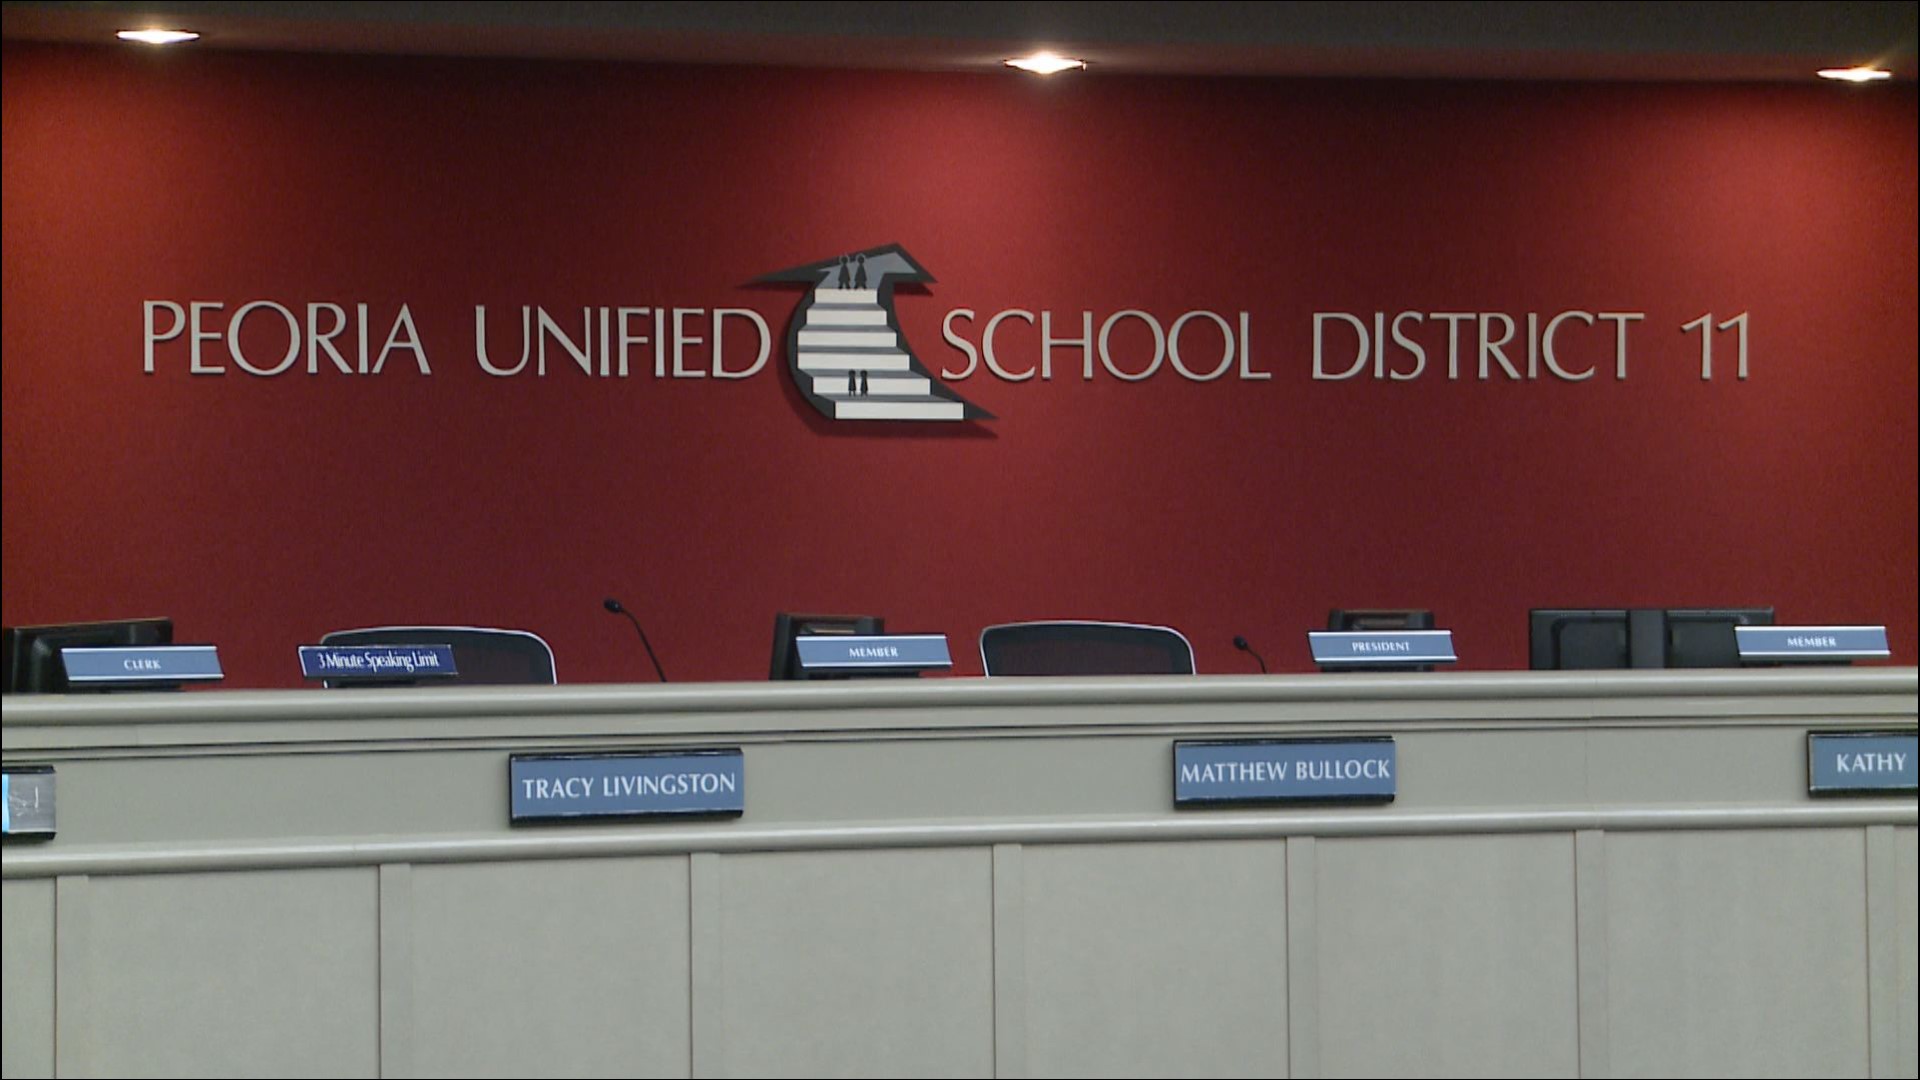 The U.S. Department of Education says students of color in the West Valley district have been subjected to racial harassment.